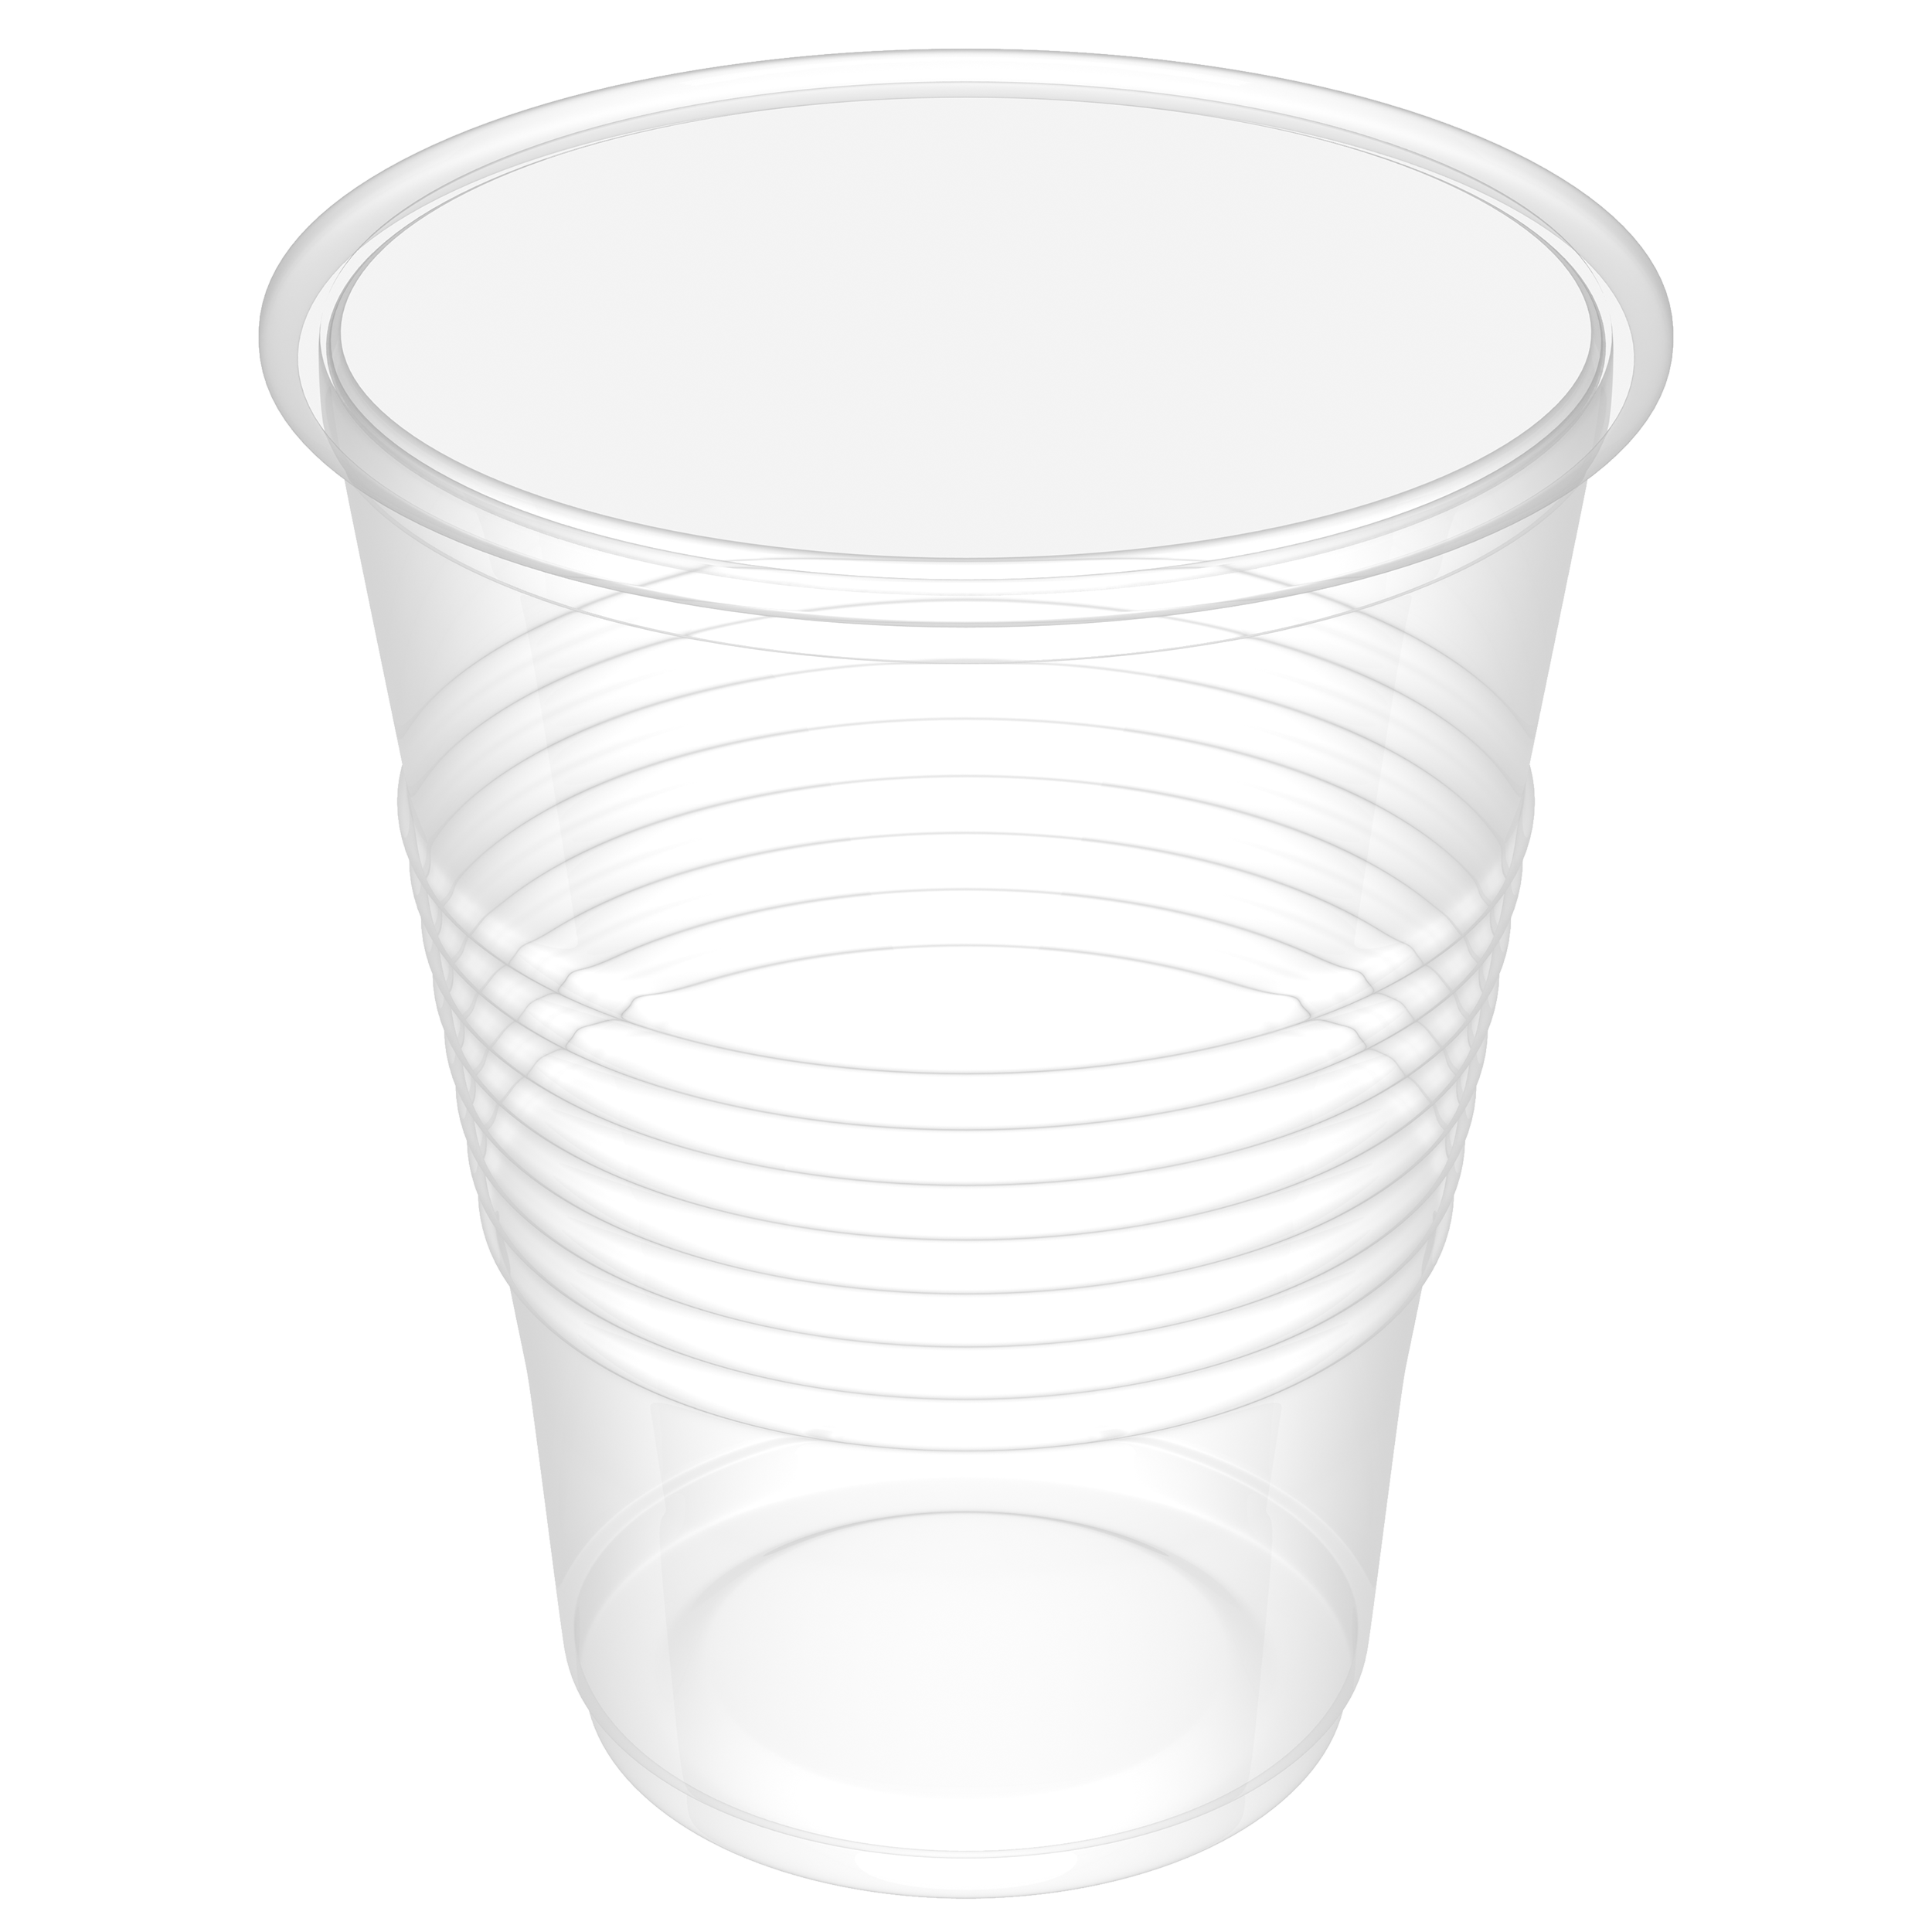 Drinking Cups - 9 oz.